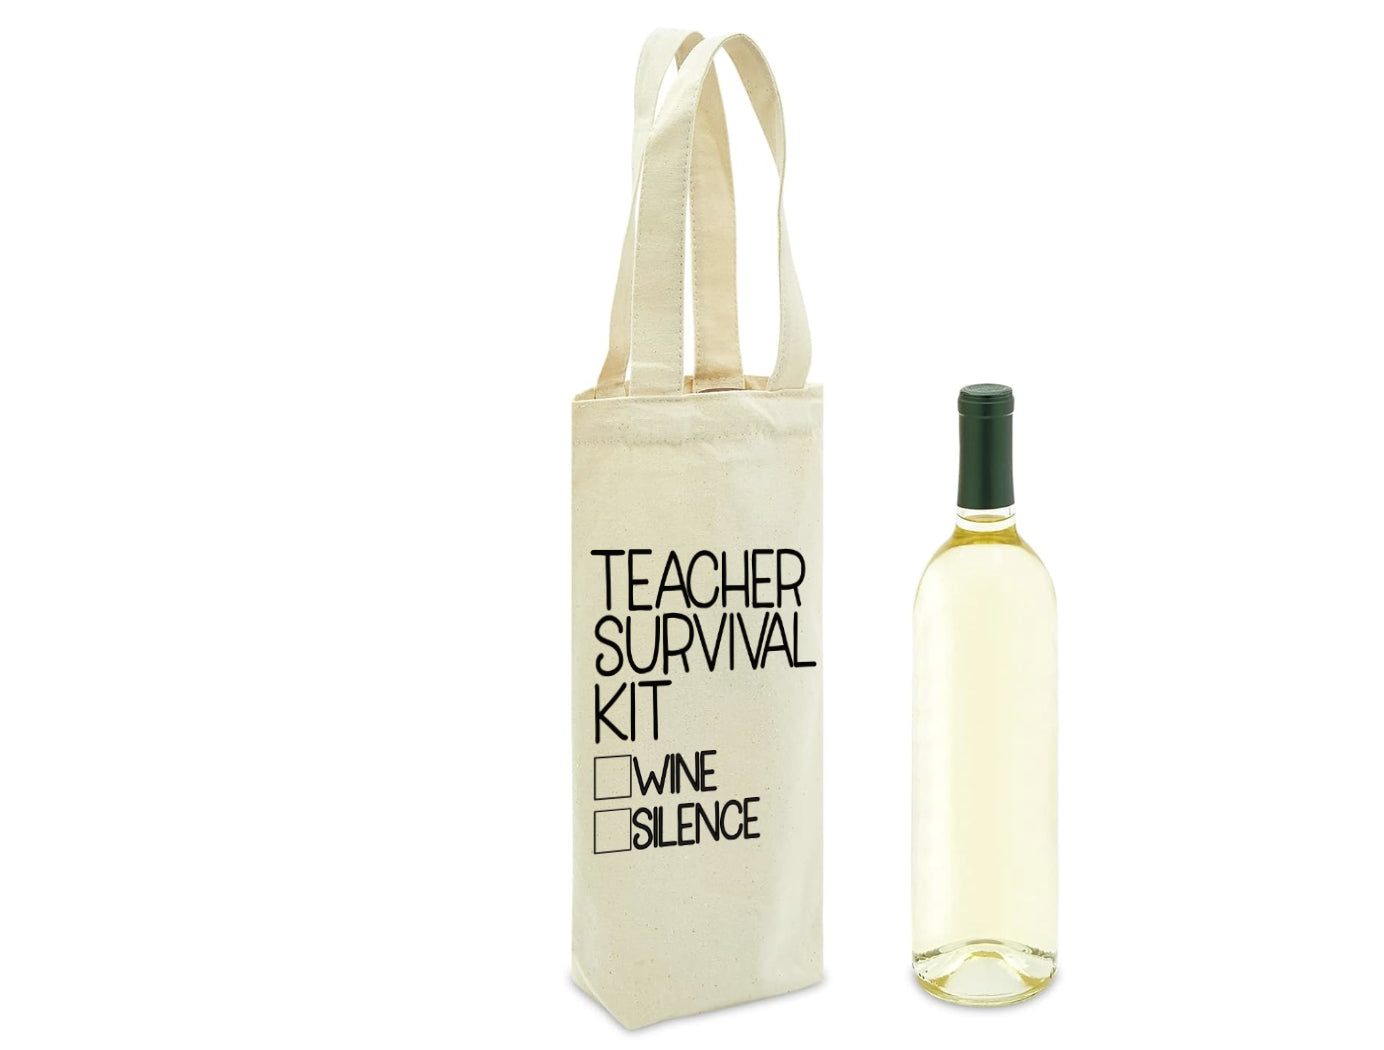 Wine bag says teacher Survival Kit, wine and silence - end of year gift for a teacher